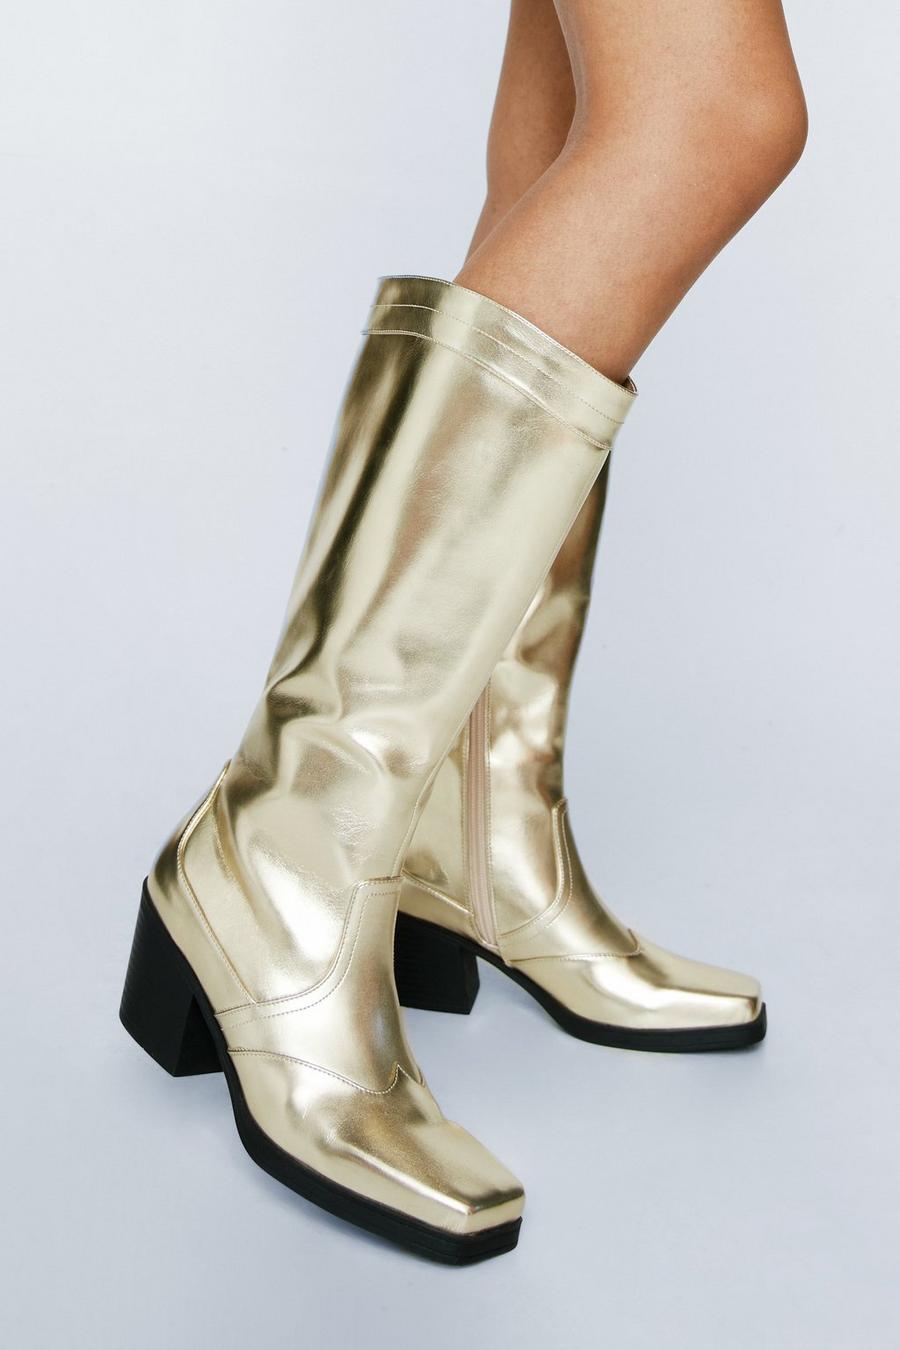 Faux Leather Metallic Square Toe Knee High Cowboy Boots